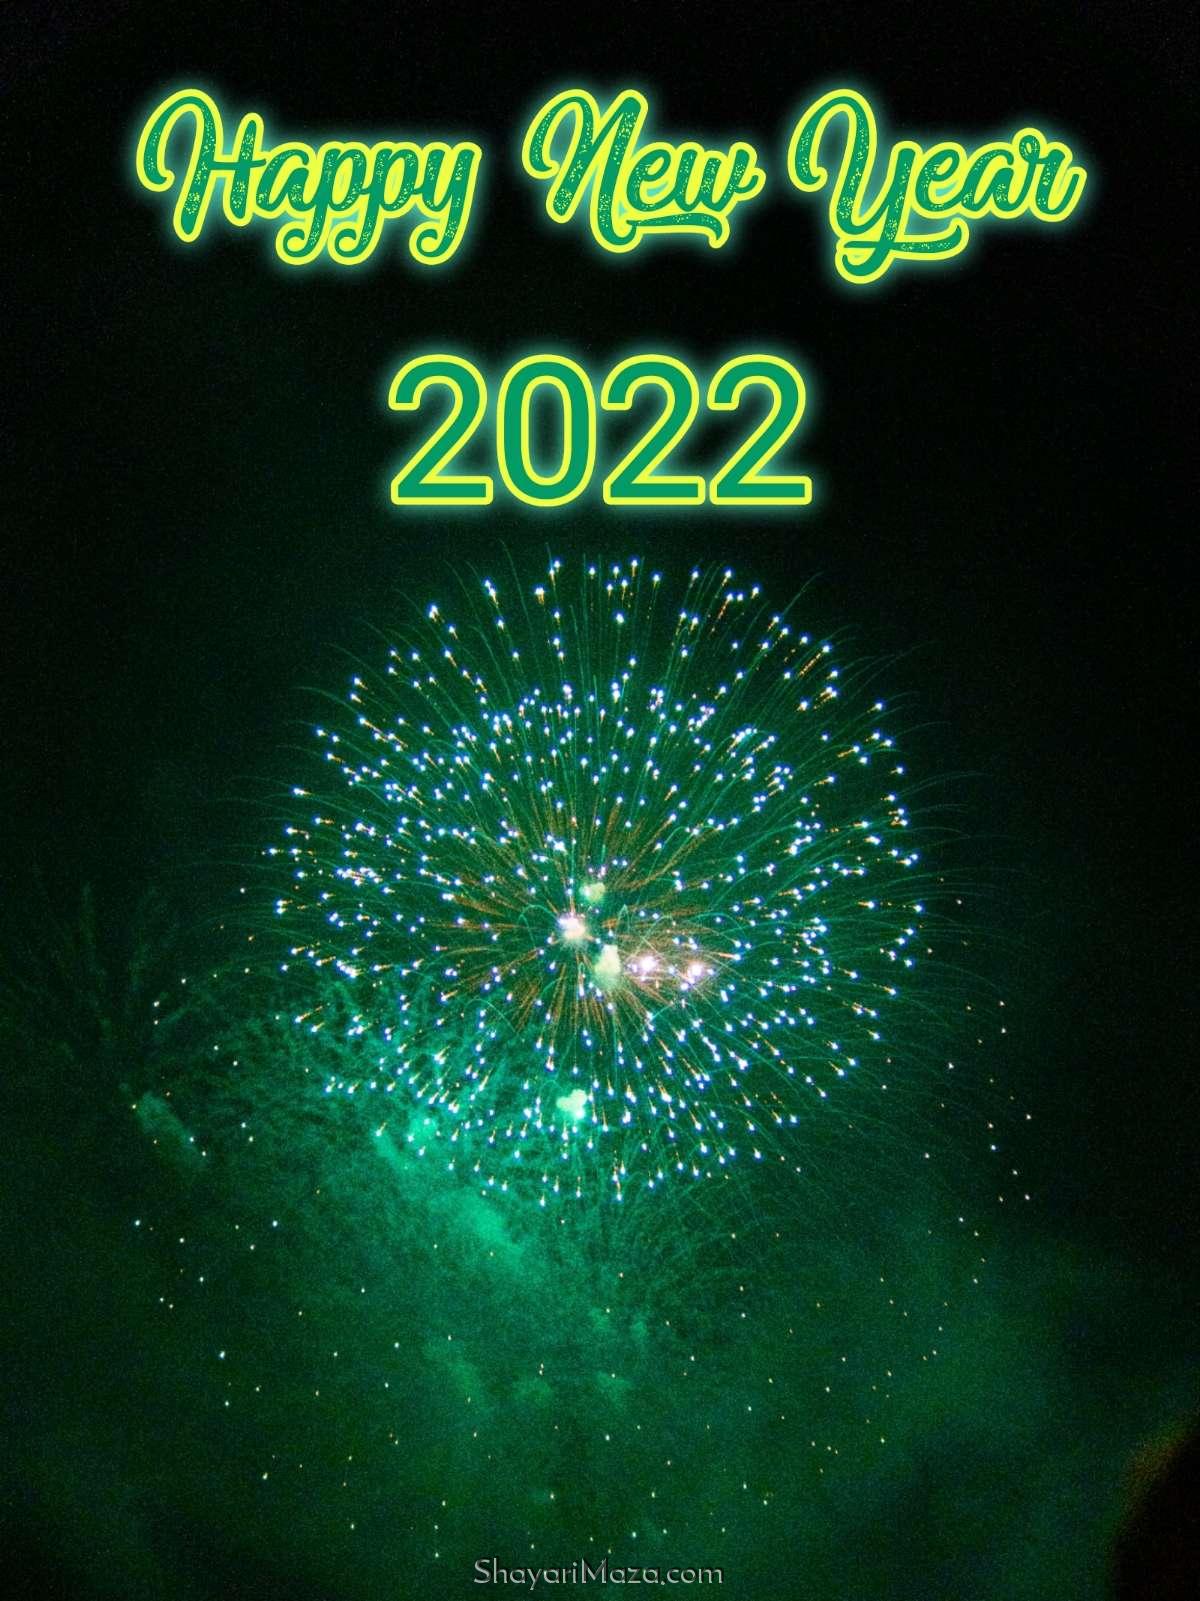 Happy New Year 2022 Free Images